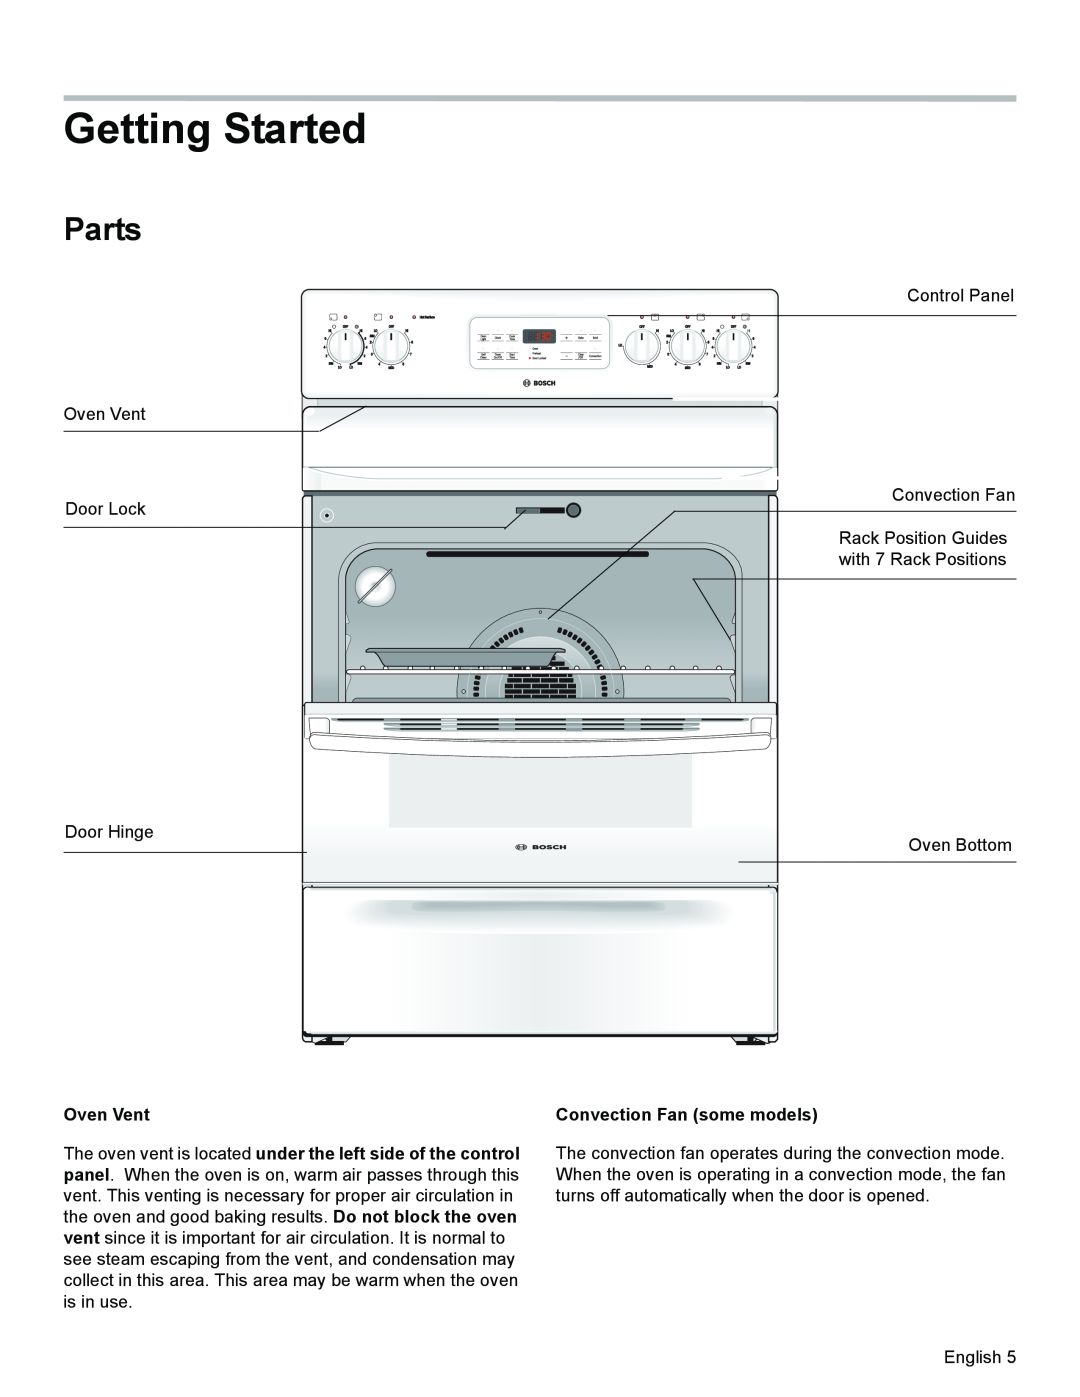 Bosch Appliances HES3063U manual Getting Started, Parts, Oven Vent, Convection Fan some models 